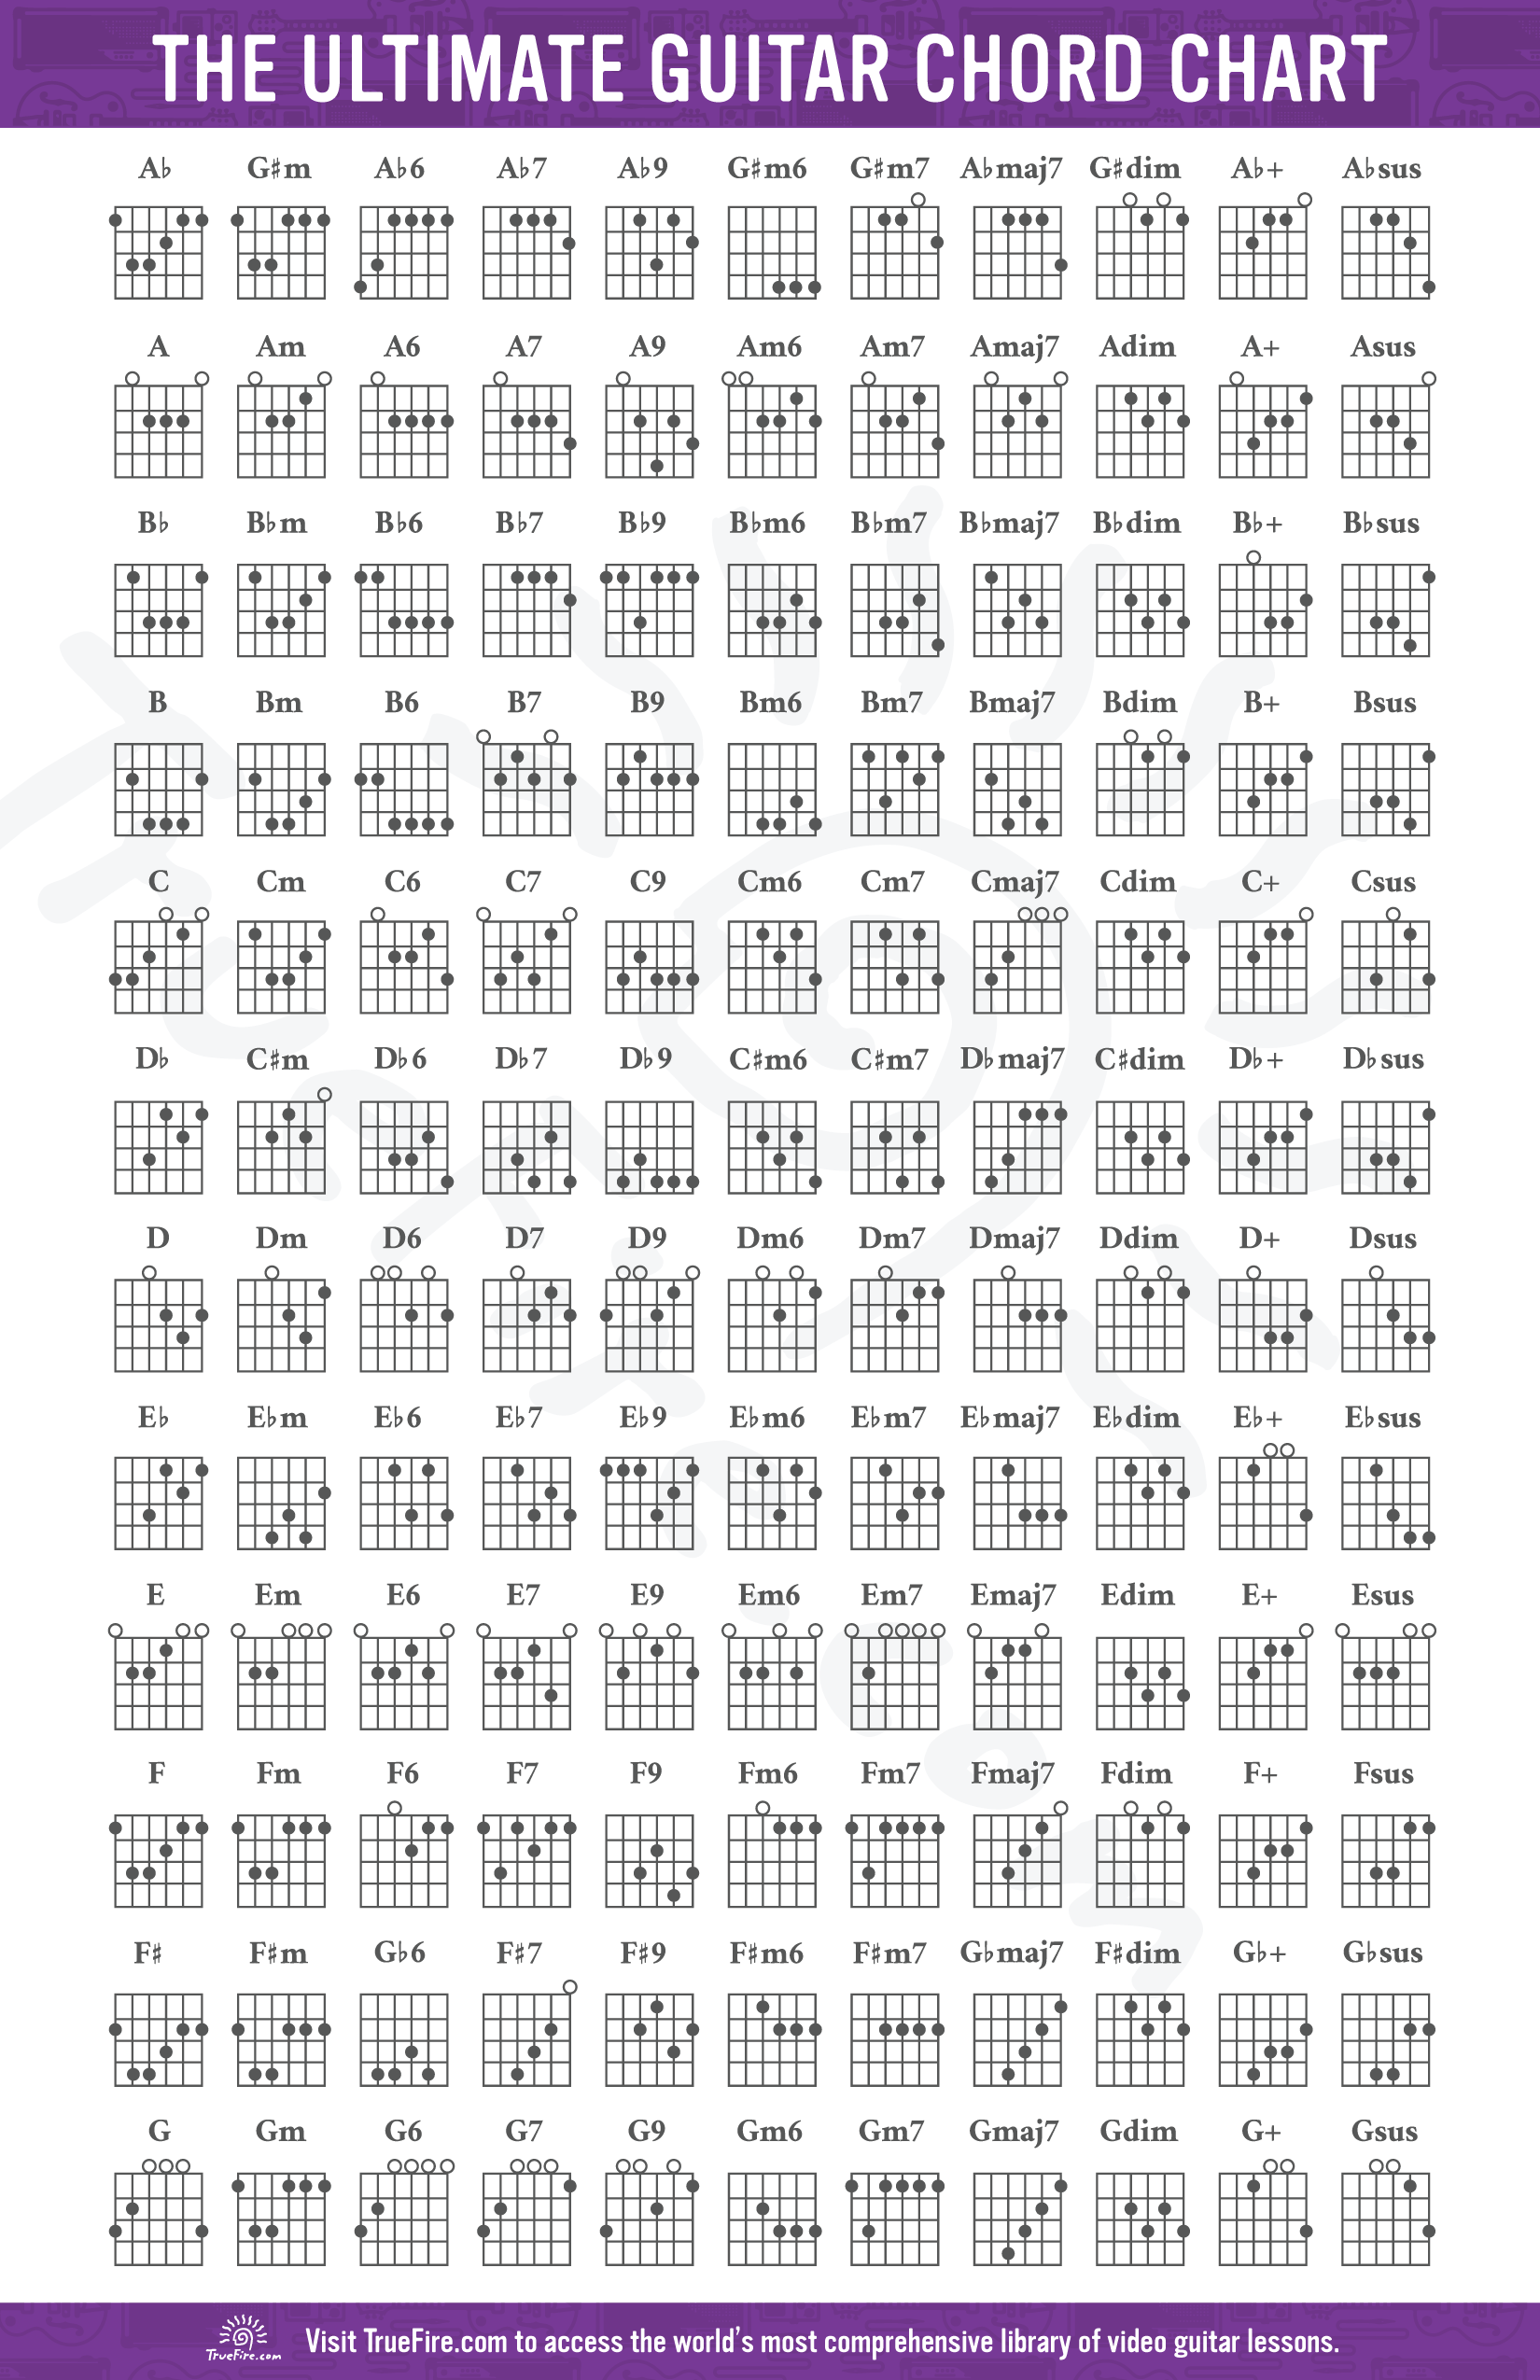 guitar-chord-diagrams-chords-organized-by-key-great-for-easing